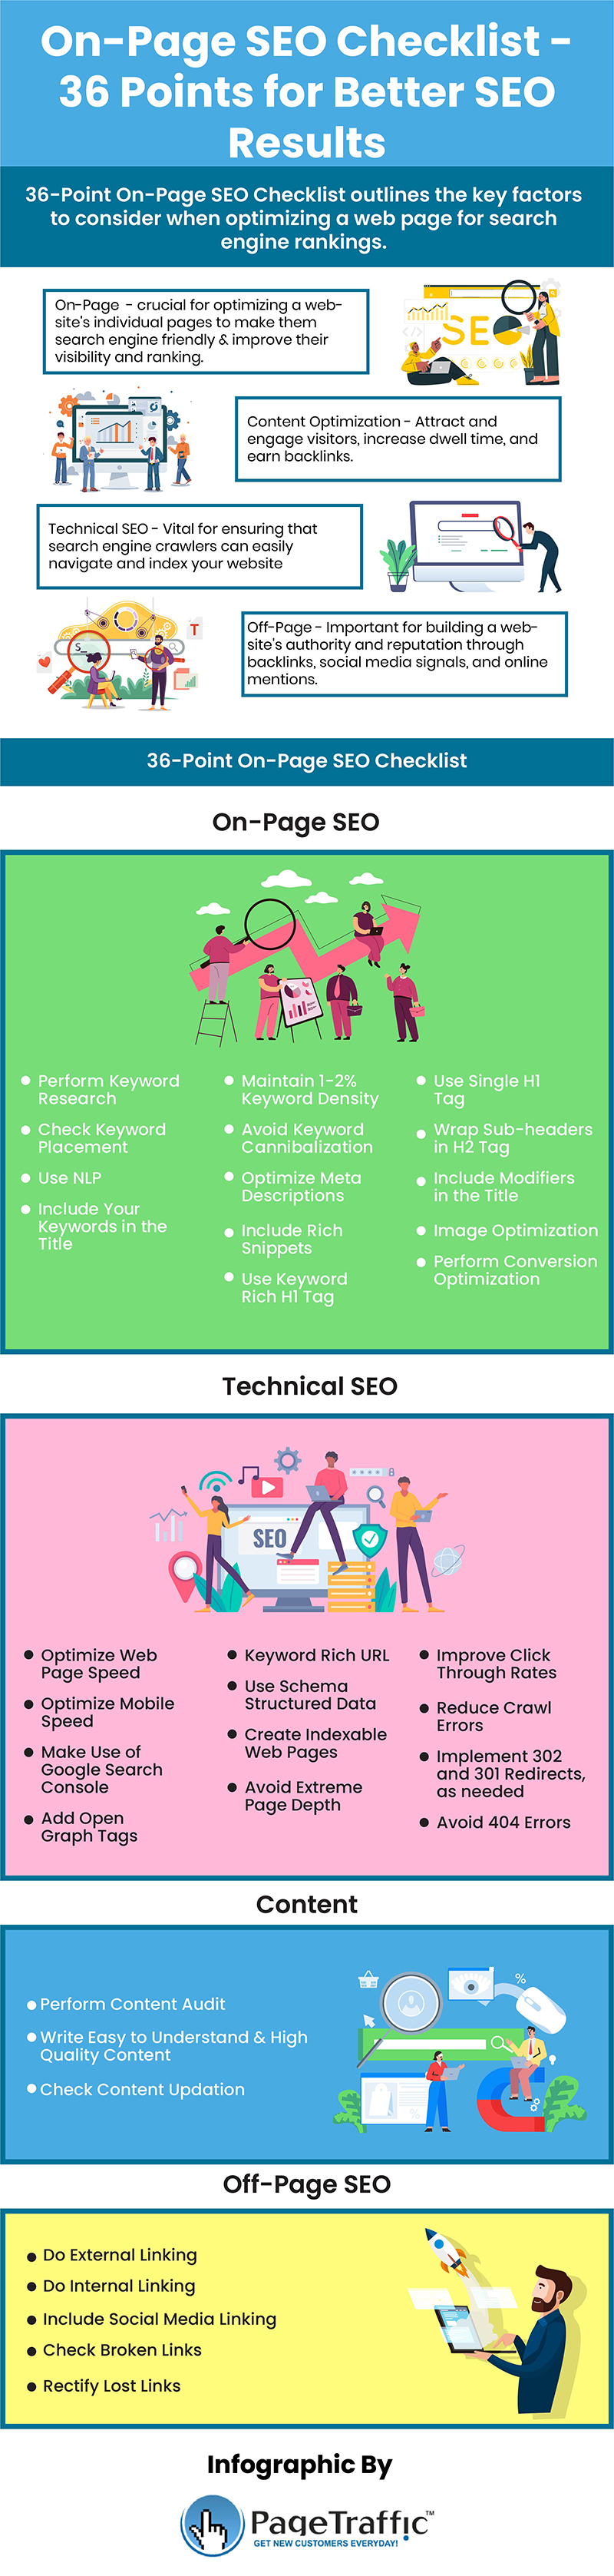 On-Page SEO Checklist - Complete Guide